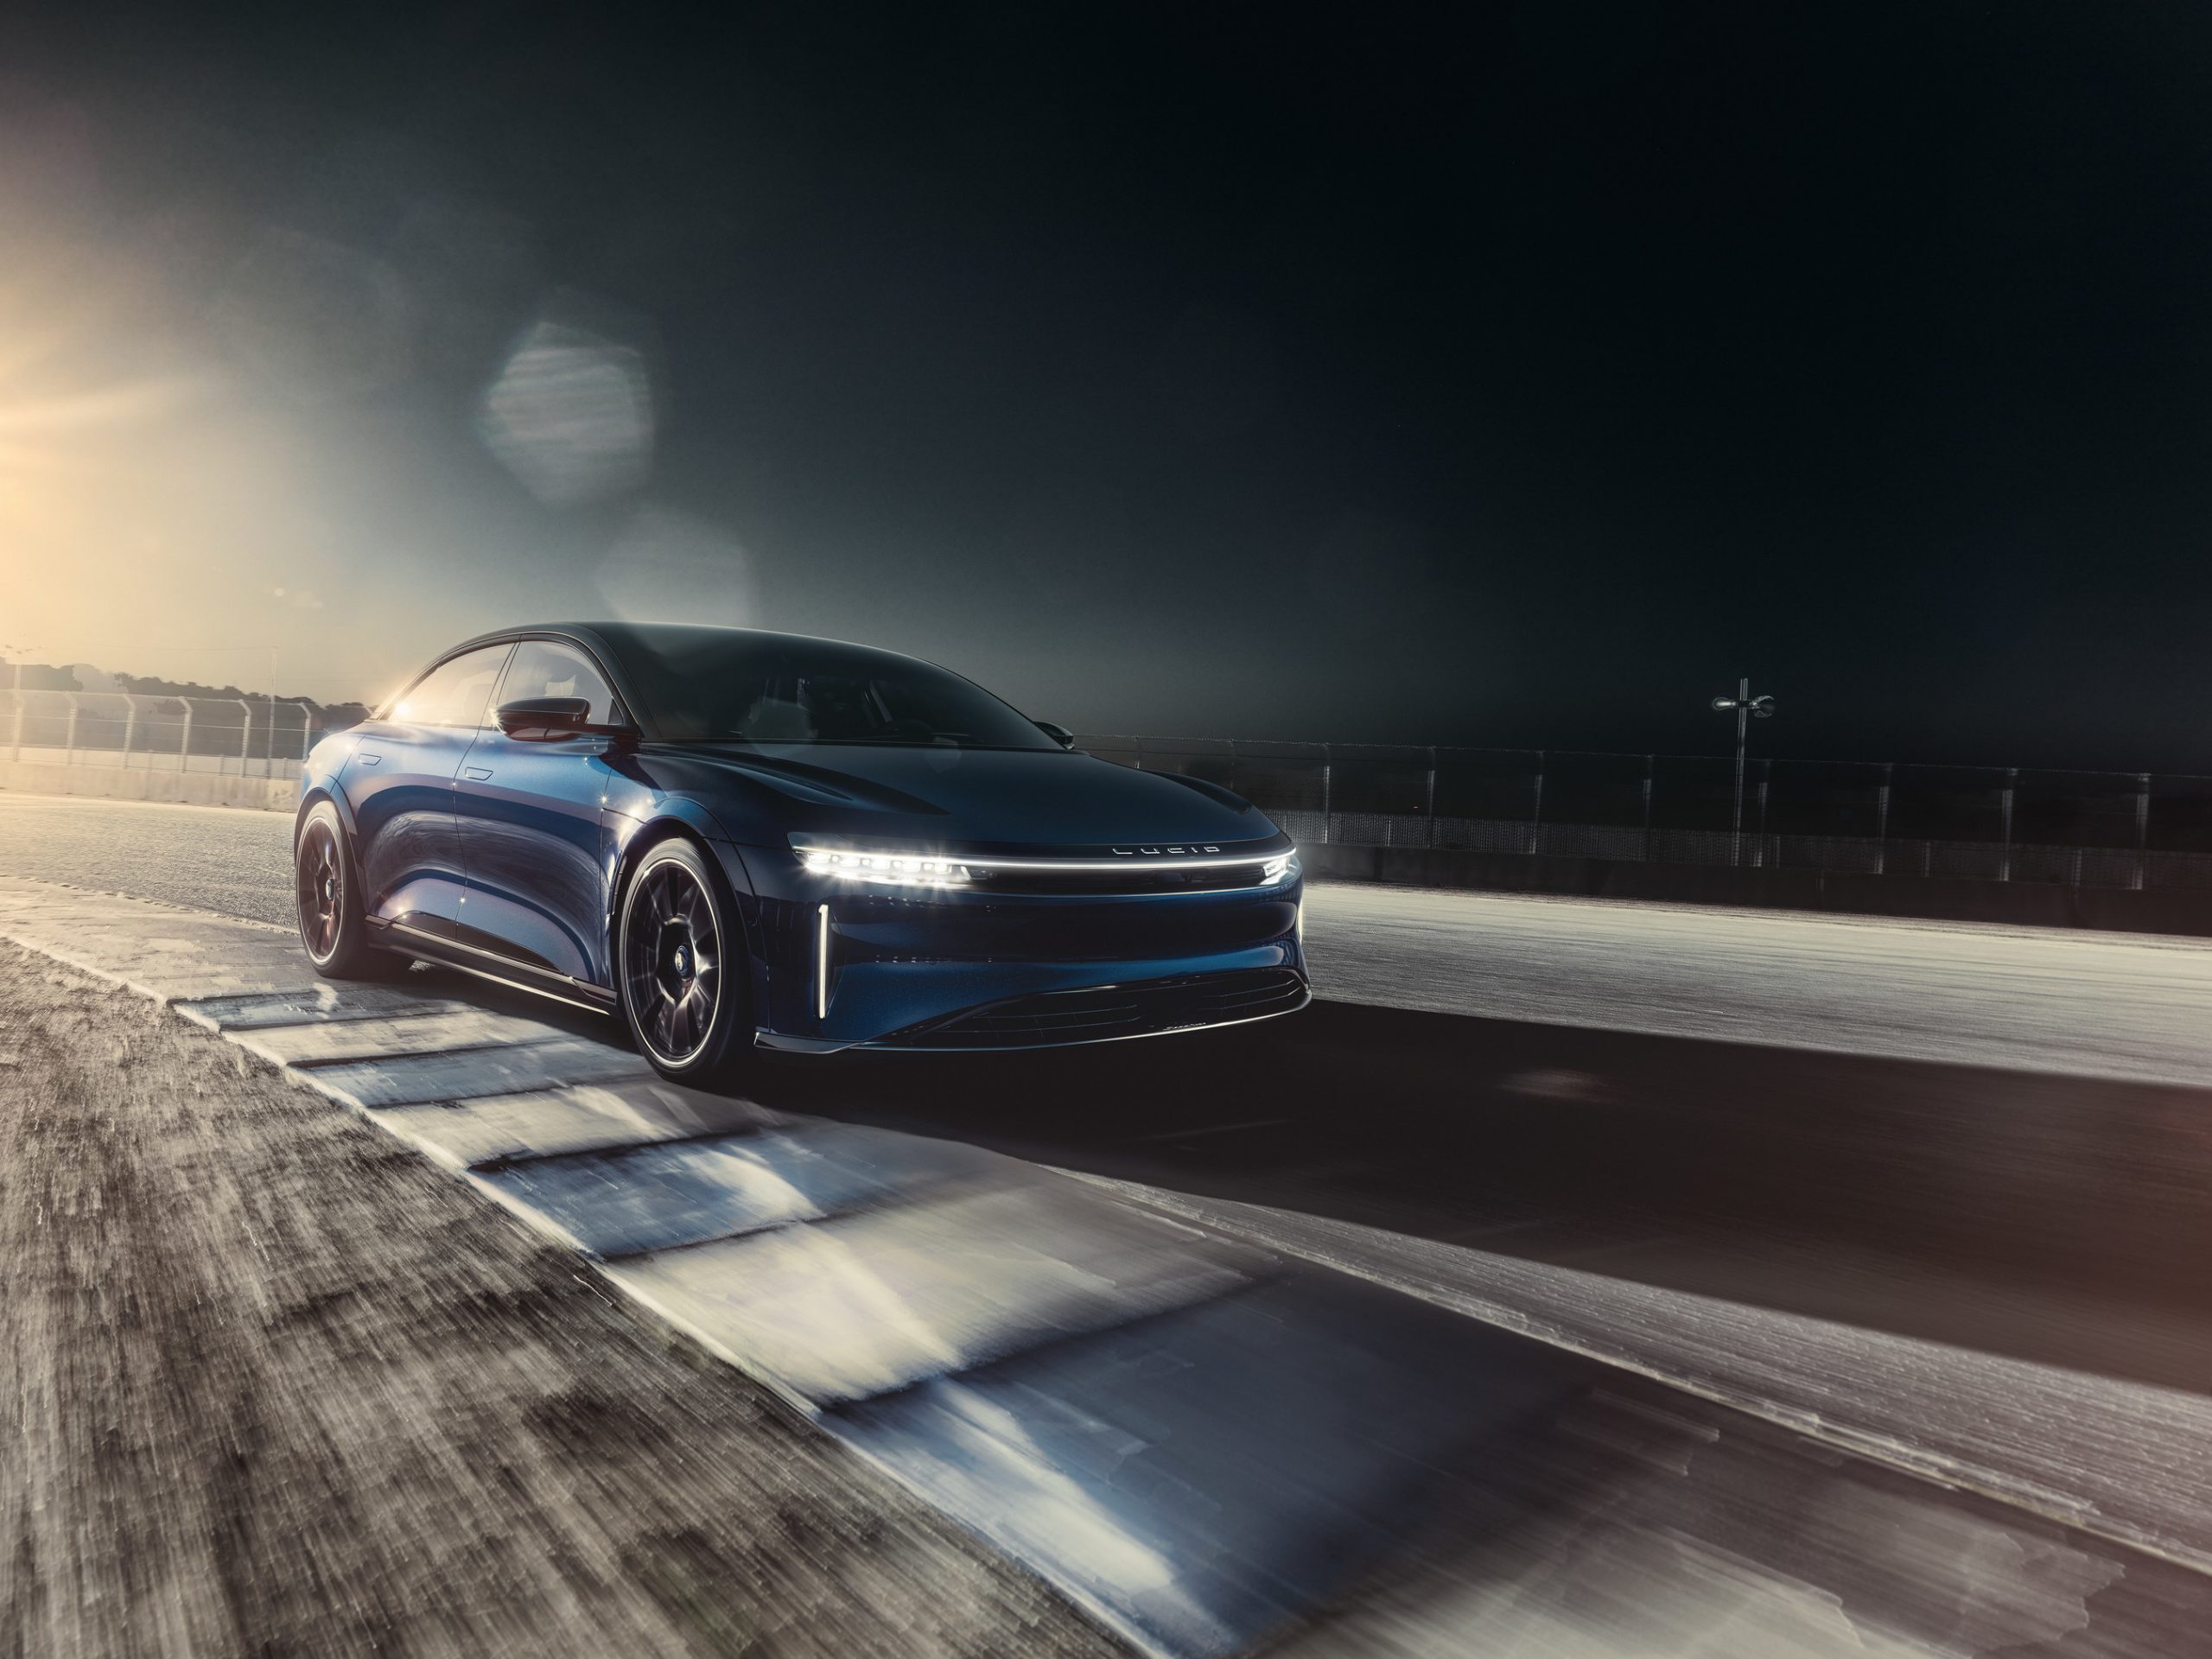 Lucid Air Sapphire driving on a racetrack.